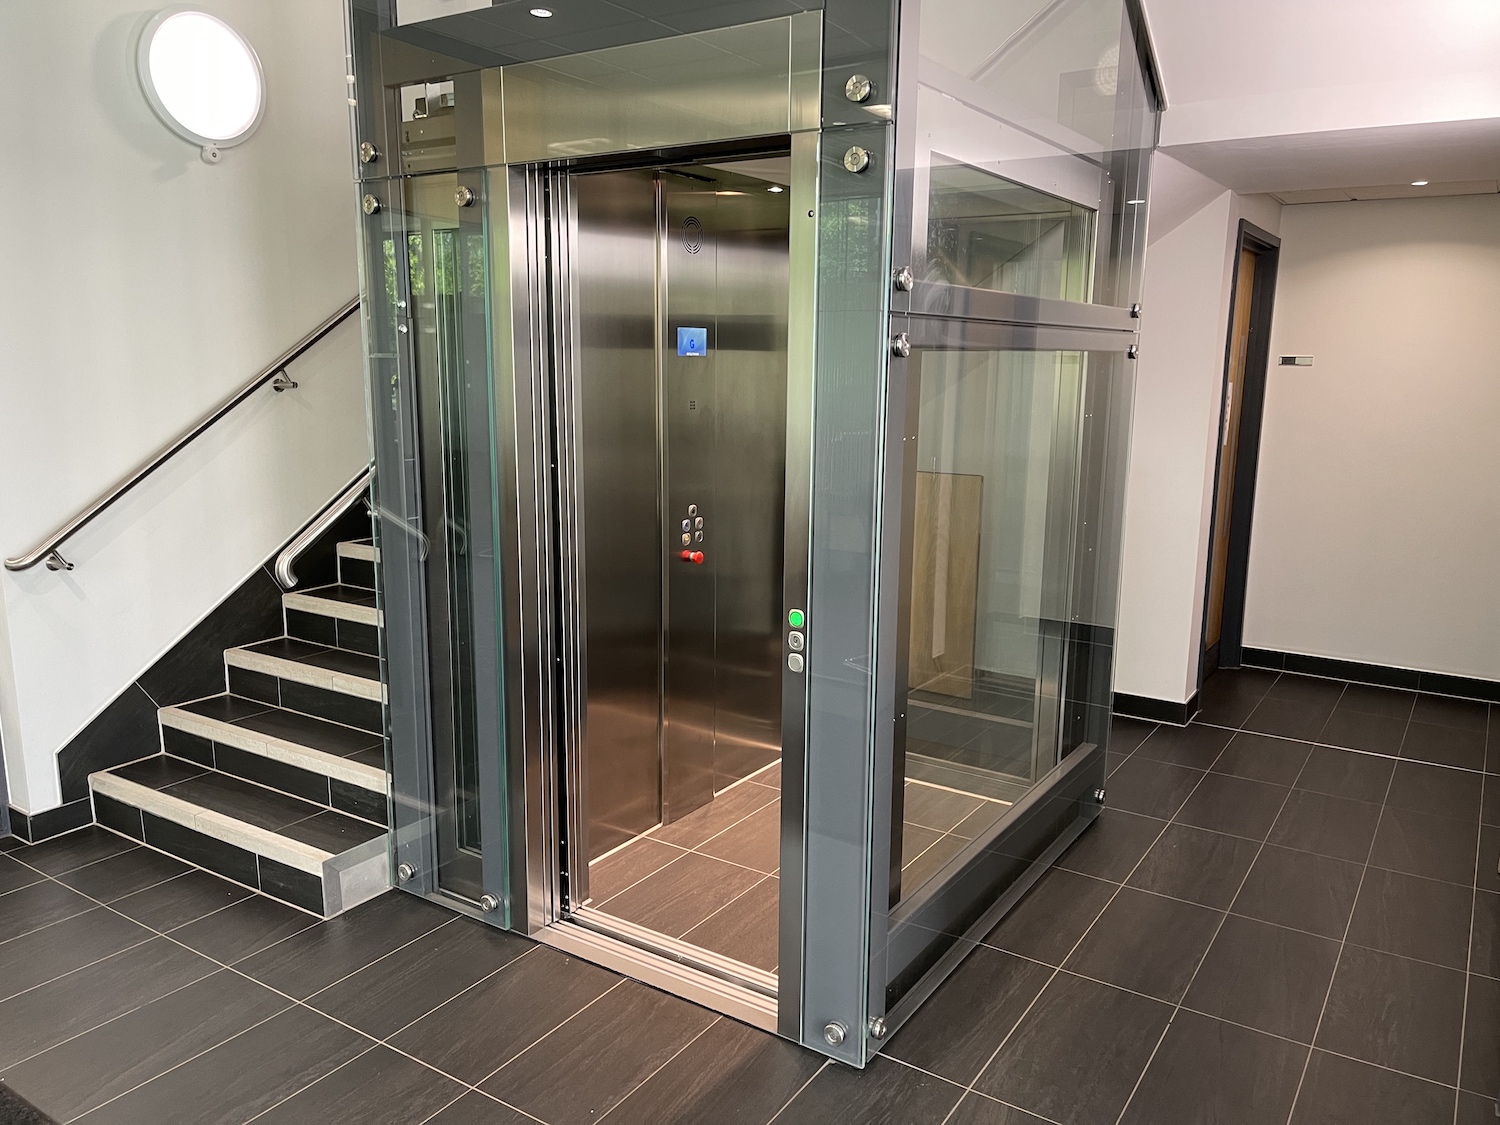 The glass cabin lift features automatic sliding doors